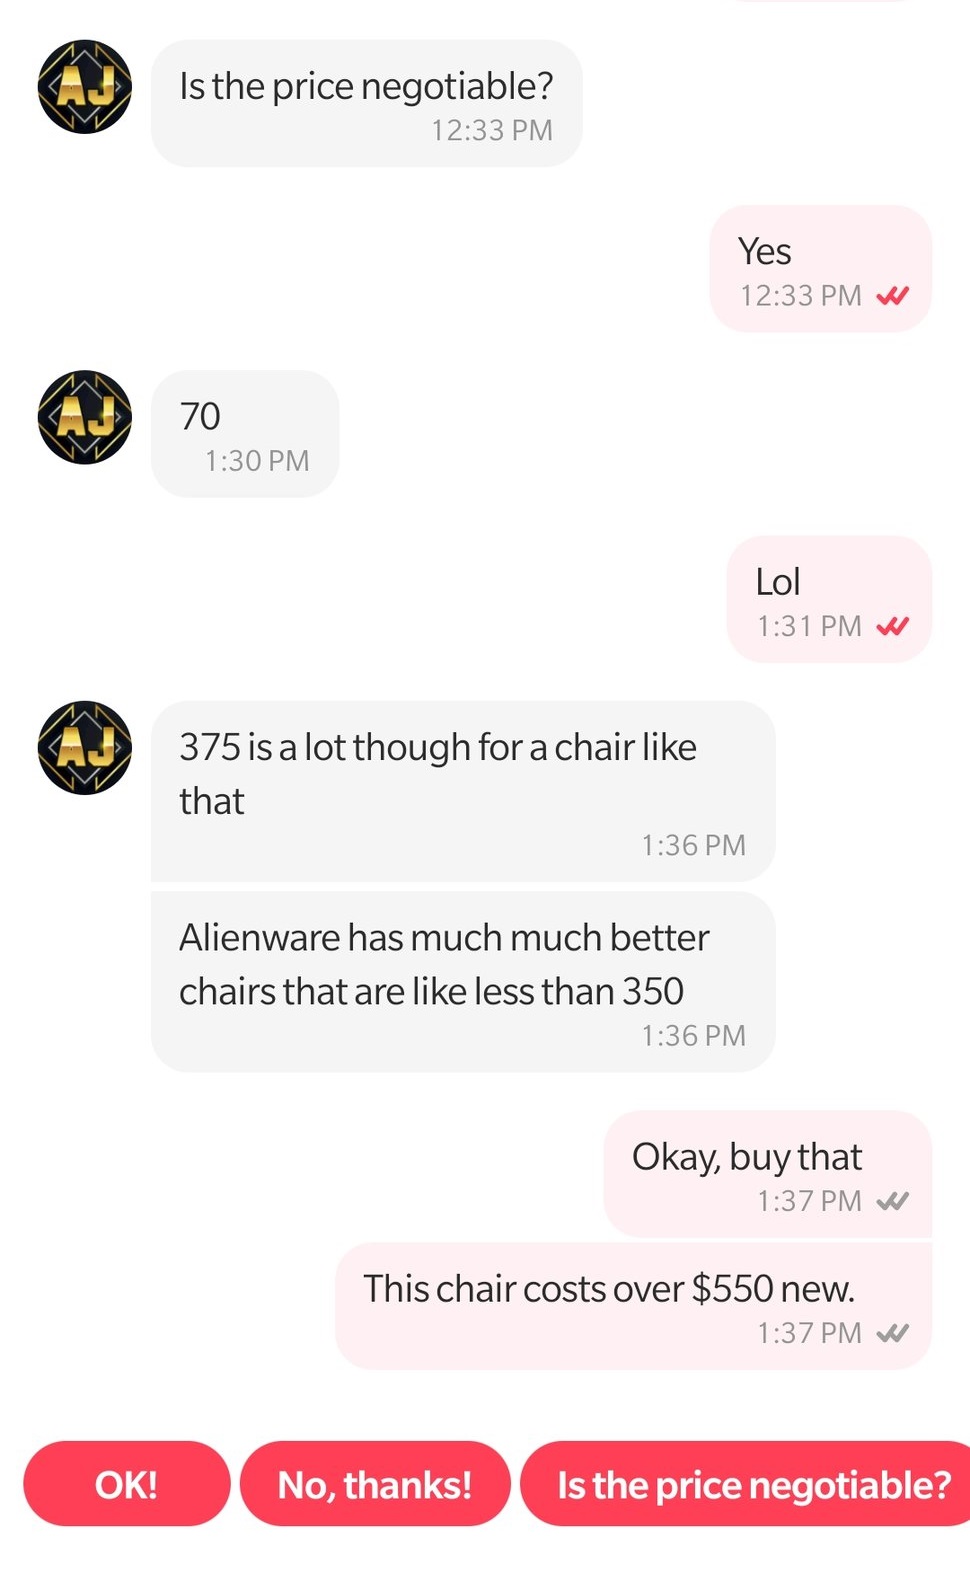 media - Is the price negotiable? Yes W 70 Lol W 375 is a lot though for a chair that Alienware has much much better chairs that are less than 350 Okay, buy that W This chair costs over $550 new. W Ok! No, thanks! Is the price negotiable?